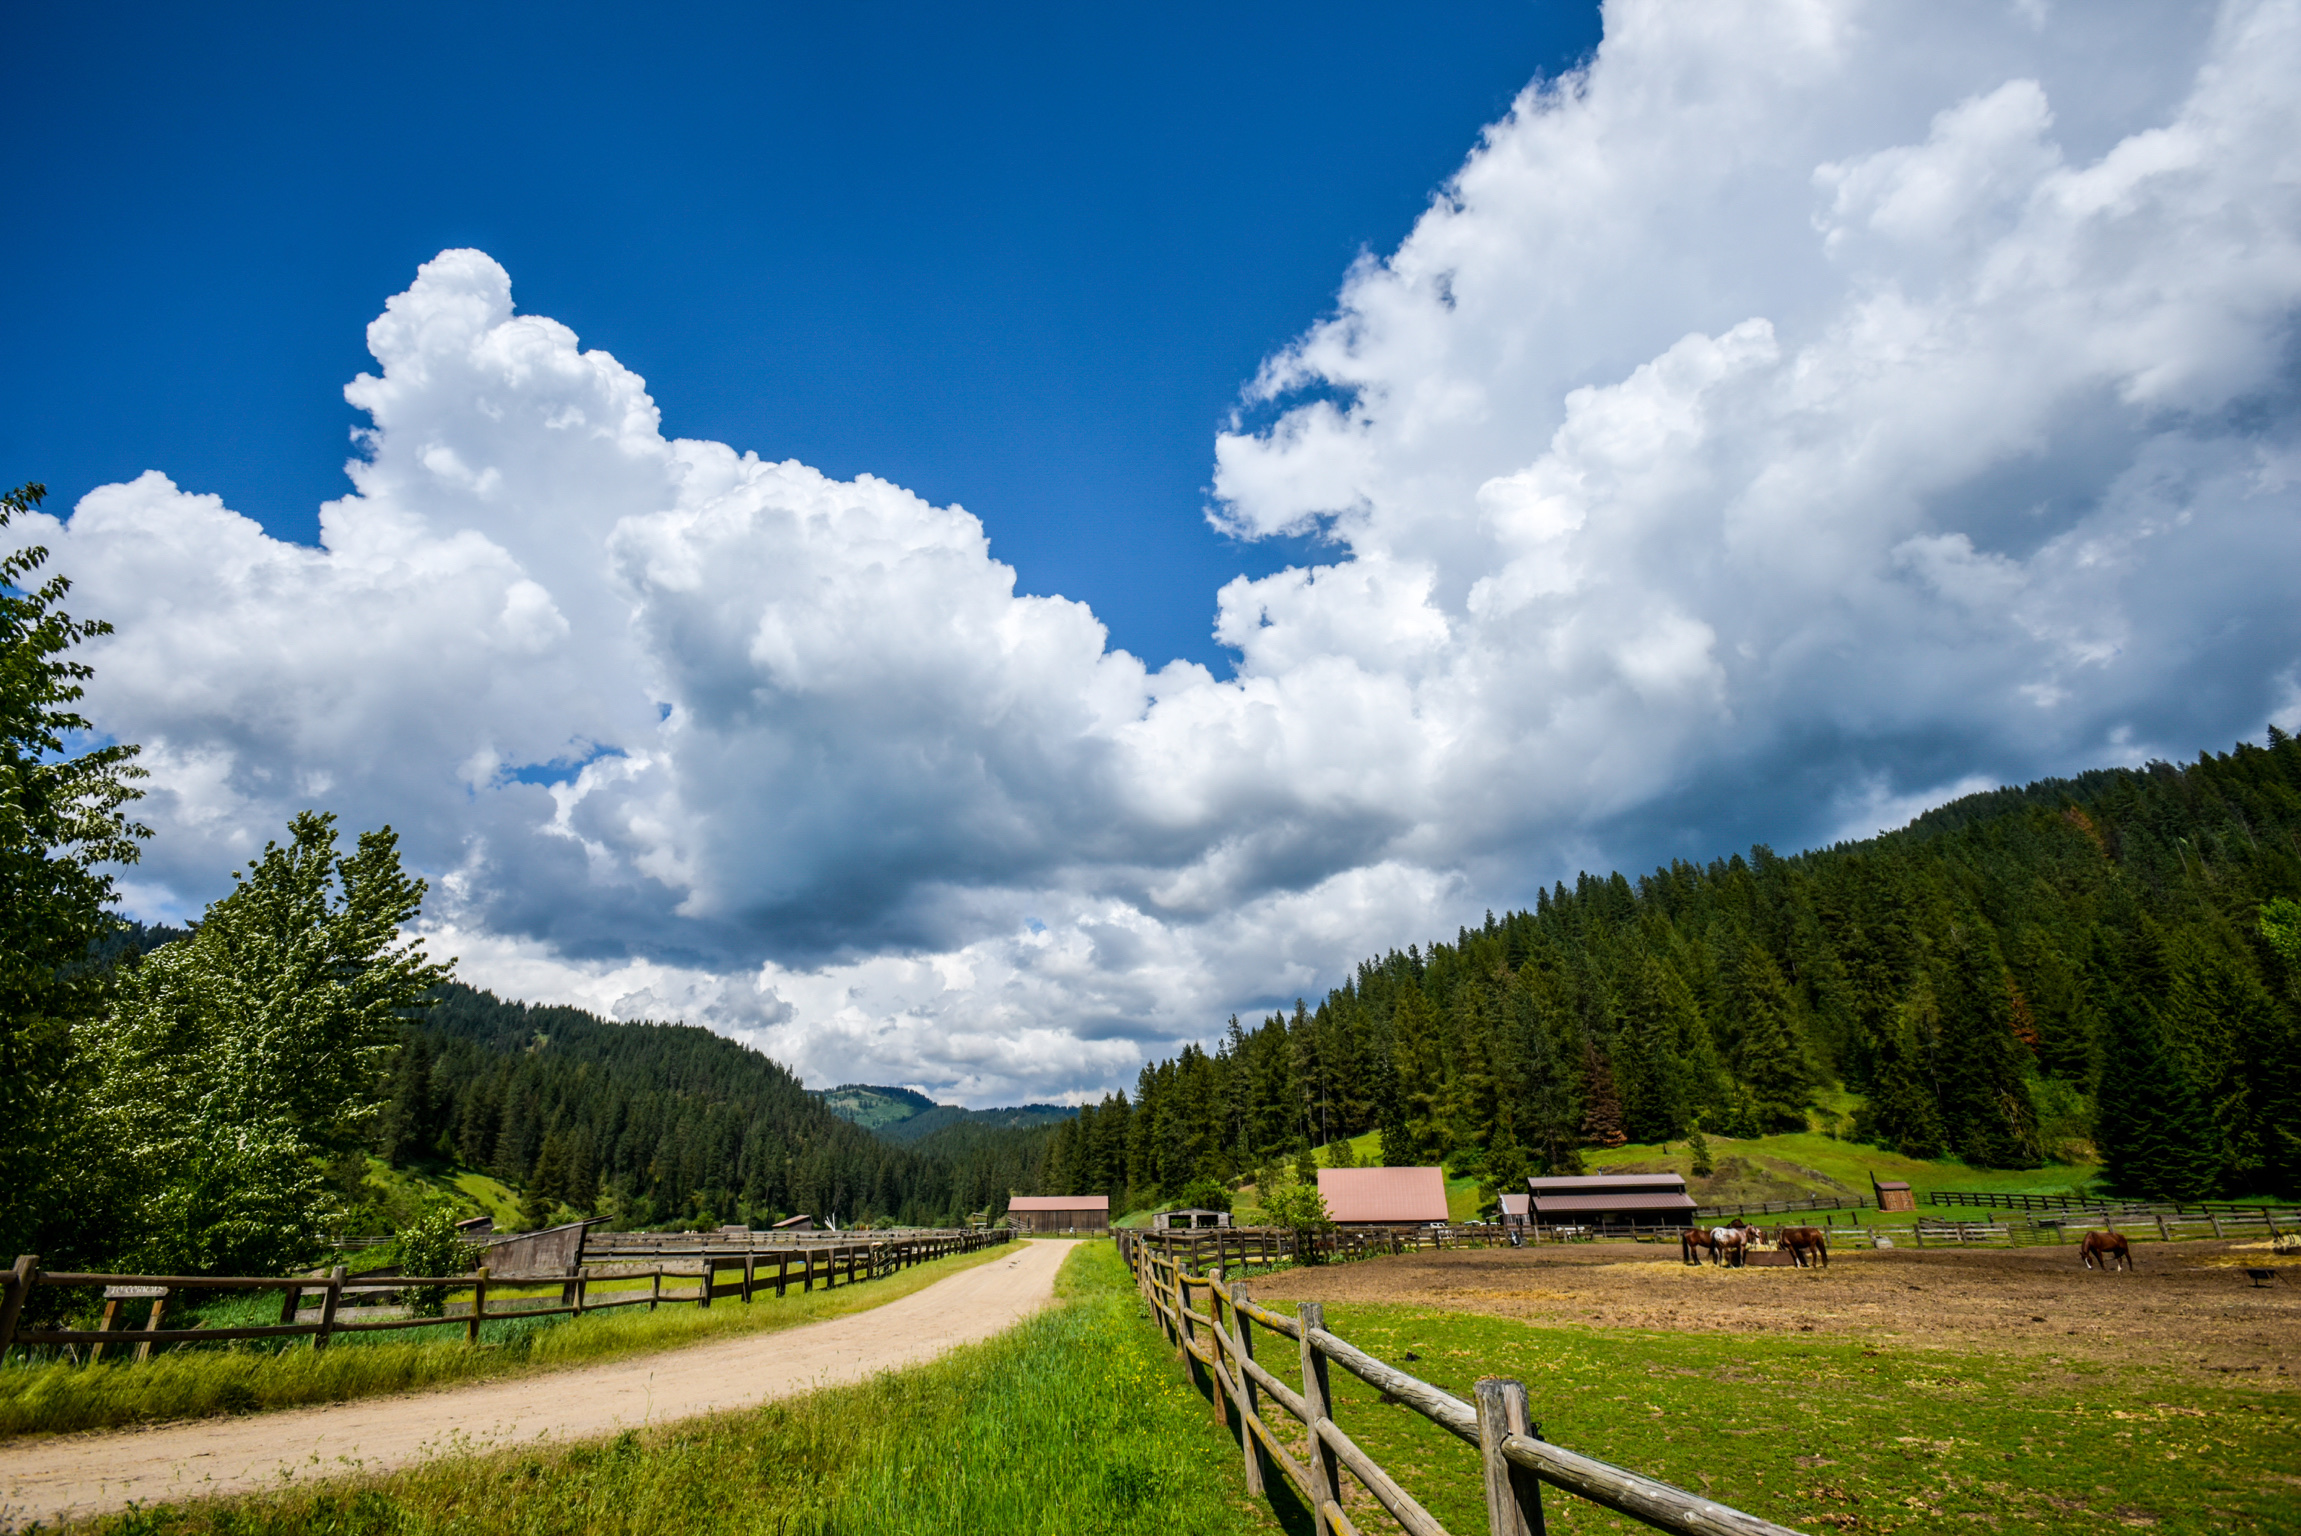 Main ranch road and white clouds